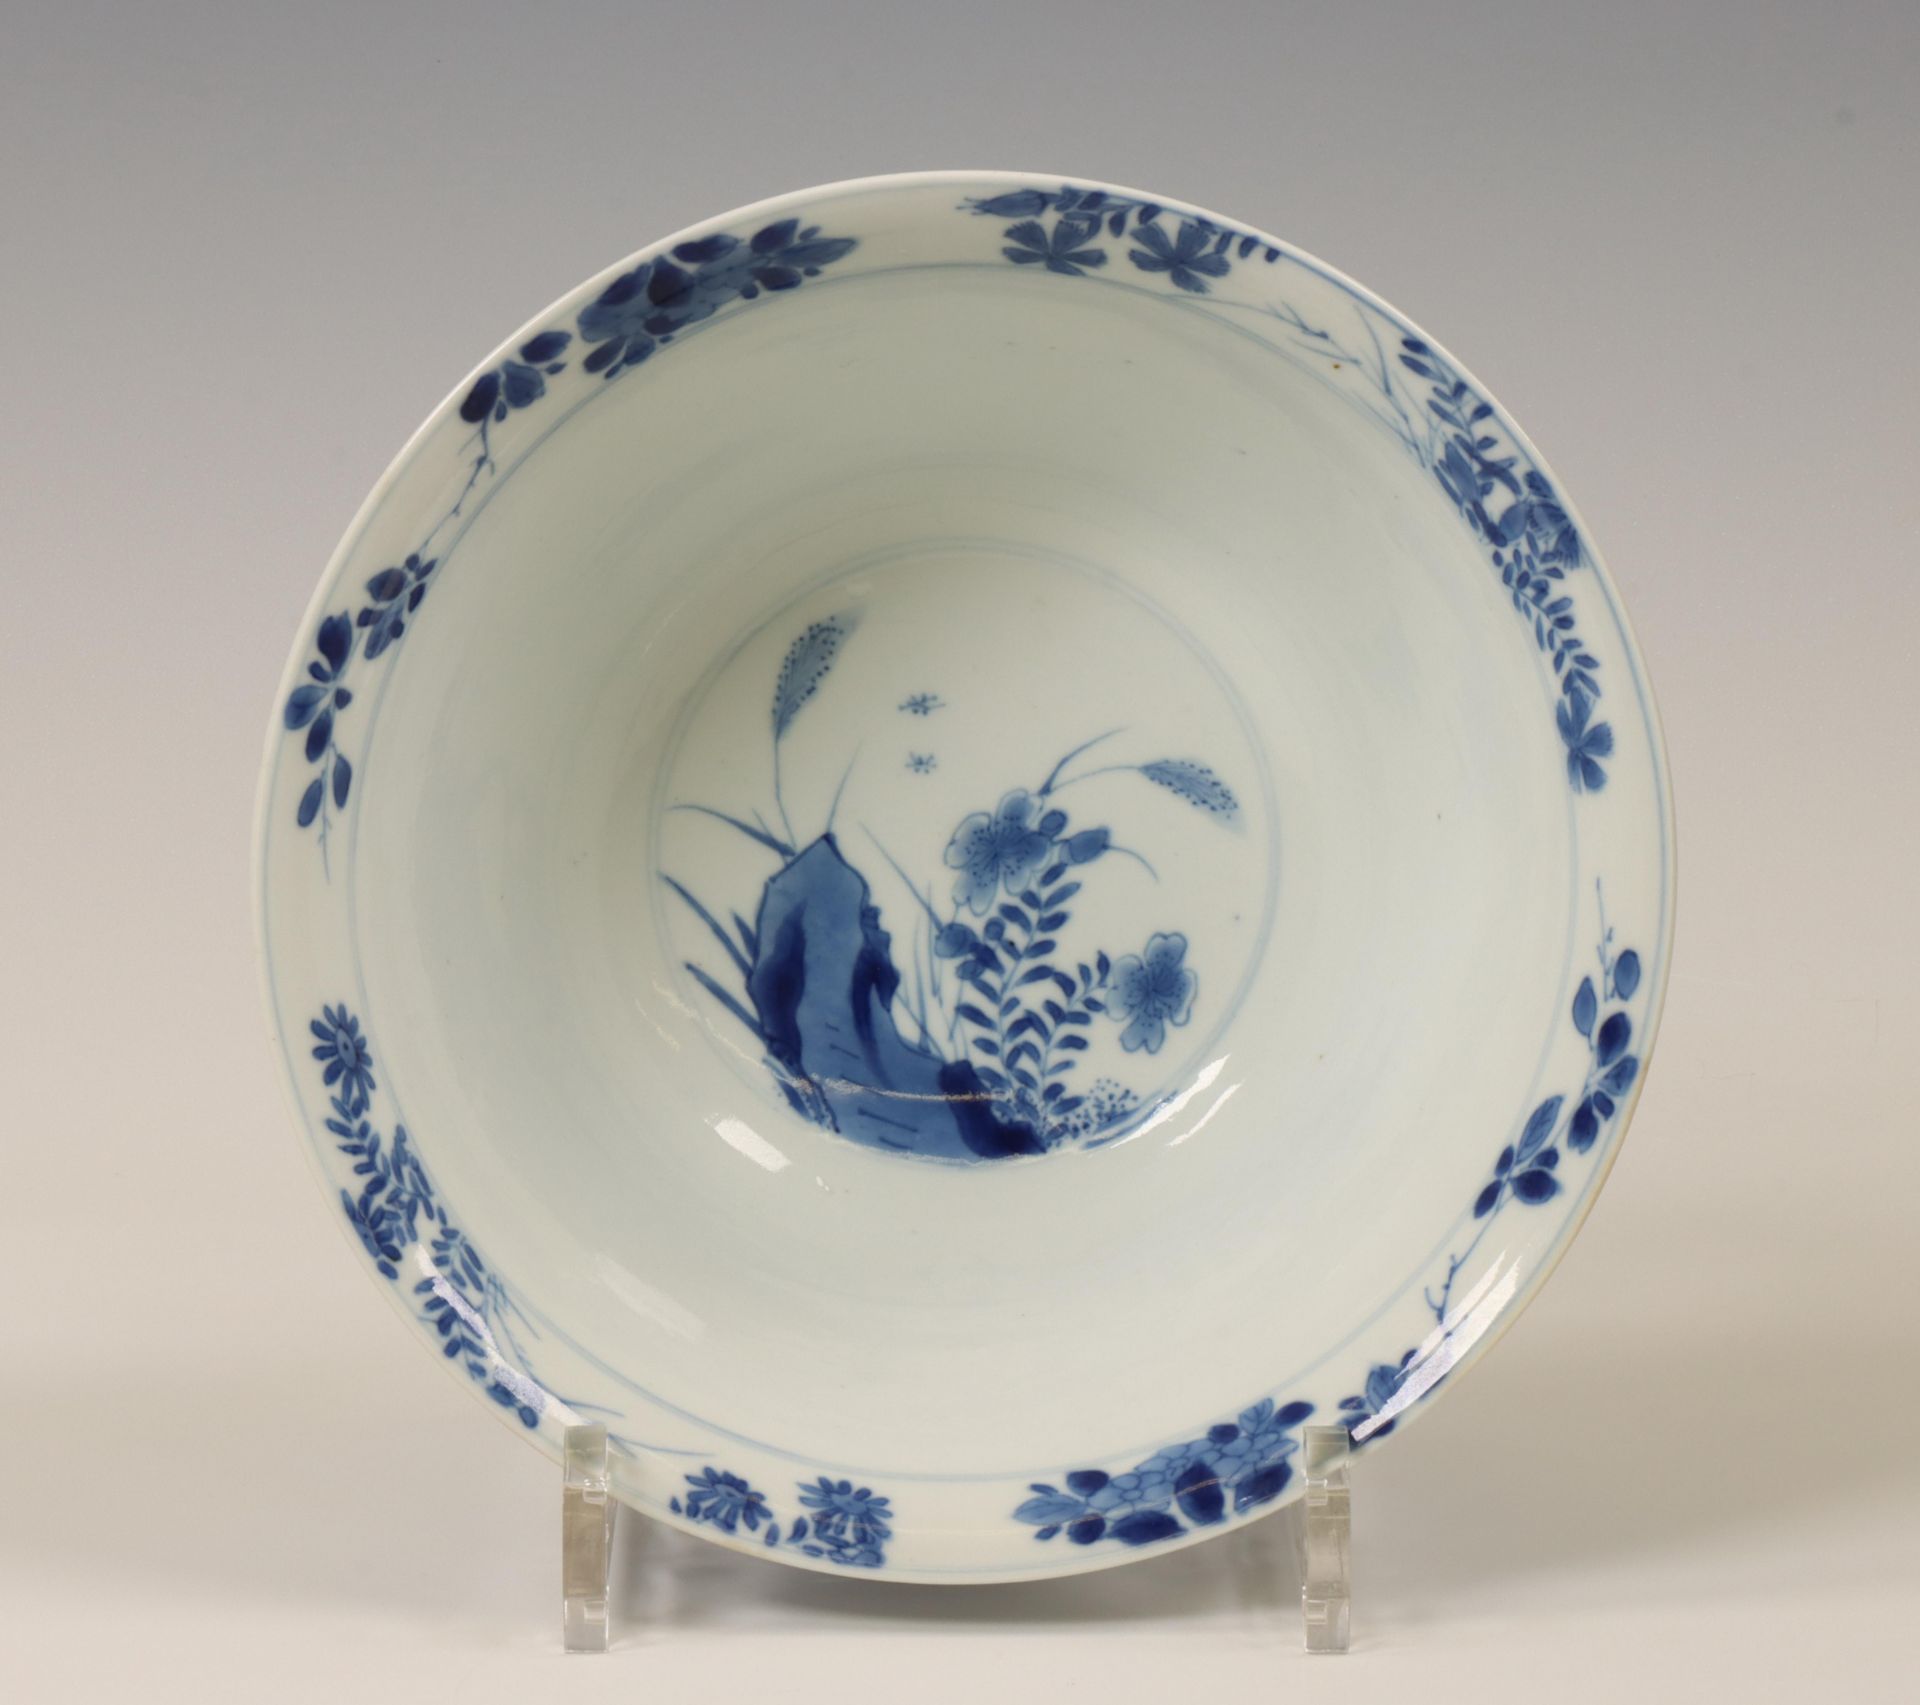 China, blue and white Transitional porcelain 'scholars' vase, mid-17th century, - Image 6 of 16